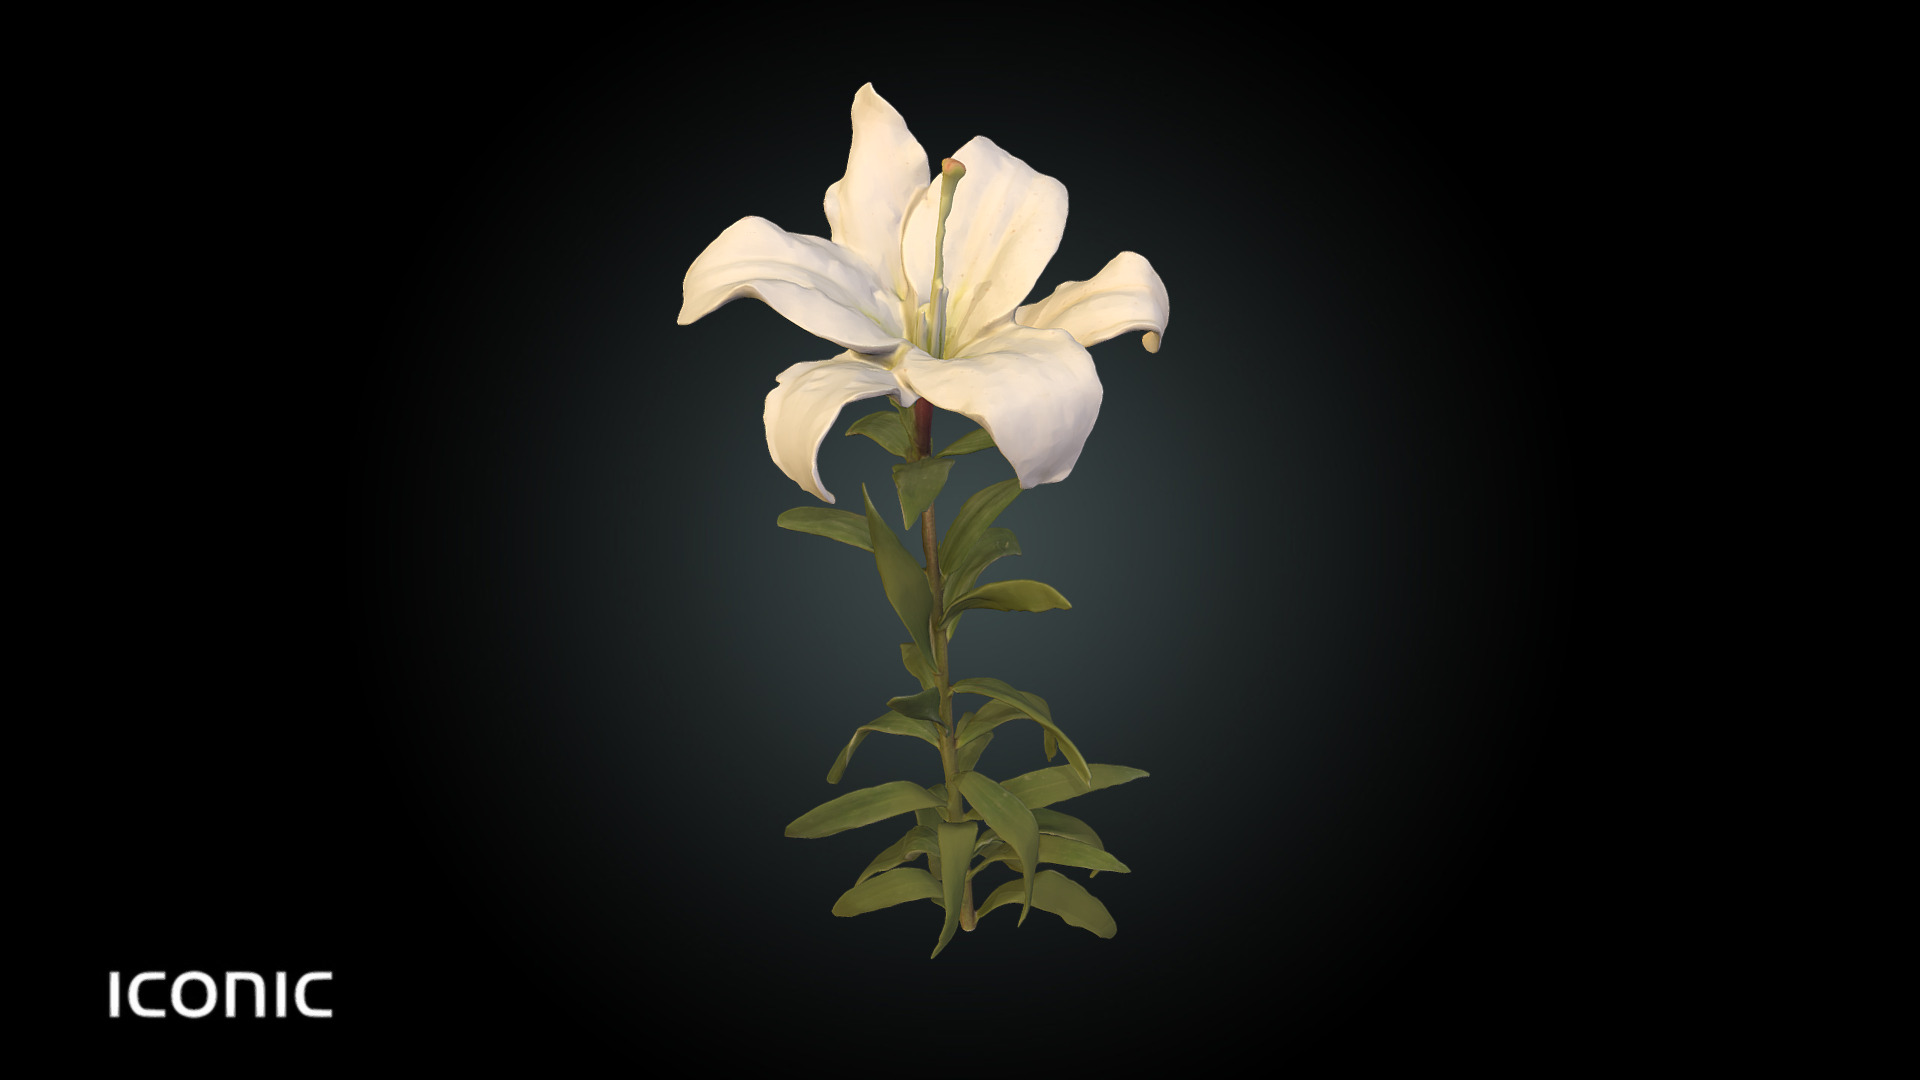 3D model Fw1 – Lilium Flower White - This is a 3D model of the Fw1 - Lilium Flower White. The 3D model is about a white flower with green leaves.